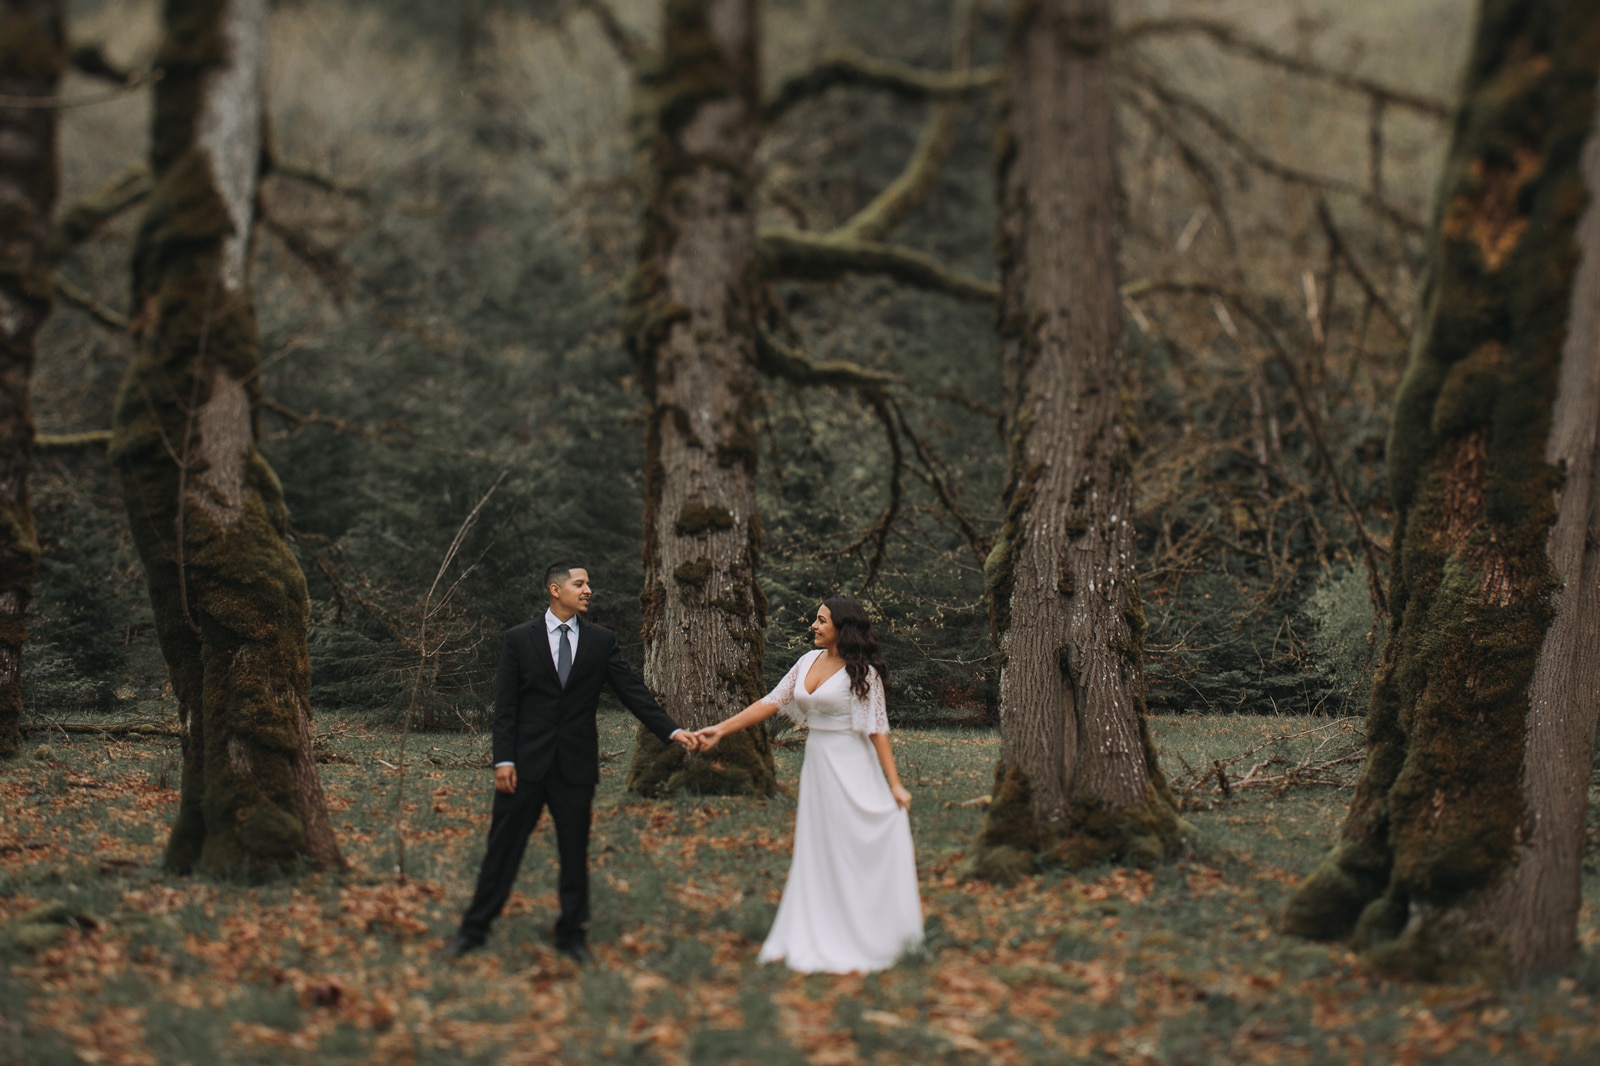 A Texan Couple Elope to Lake Crescent